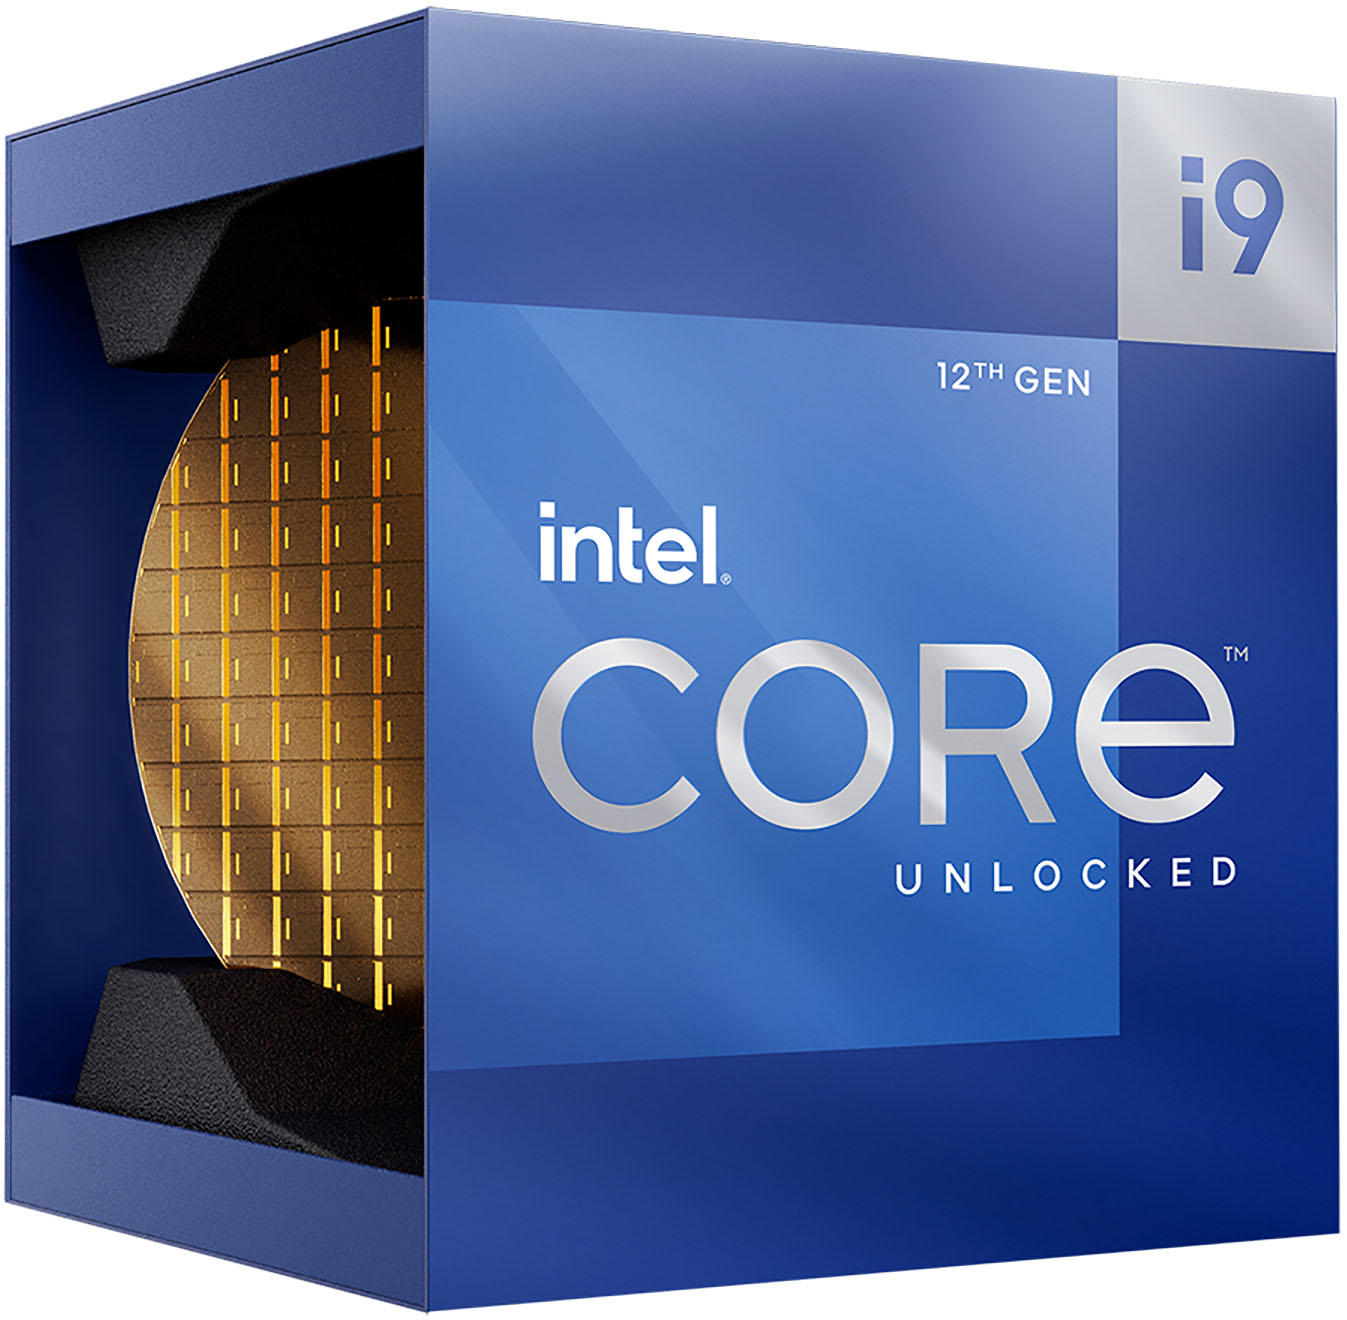 Intel claims the Core i9 12900K is the 'world's best gaming processor' but  has to retest Ryzen